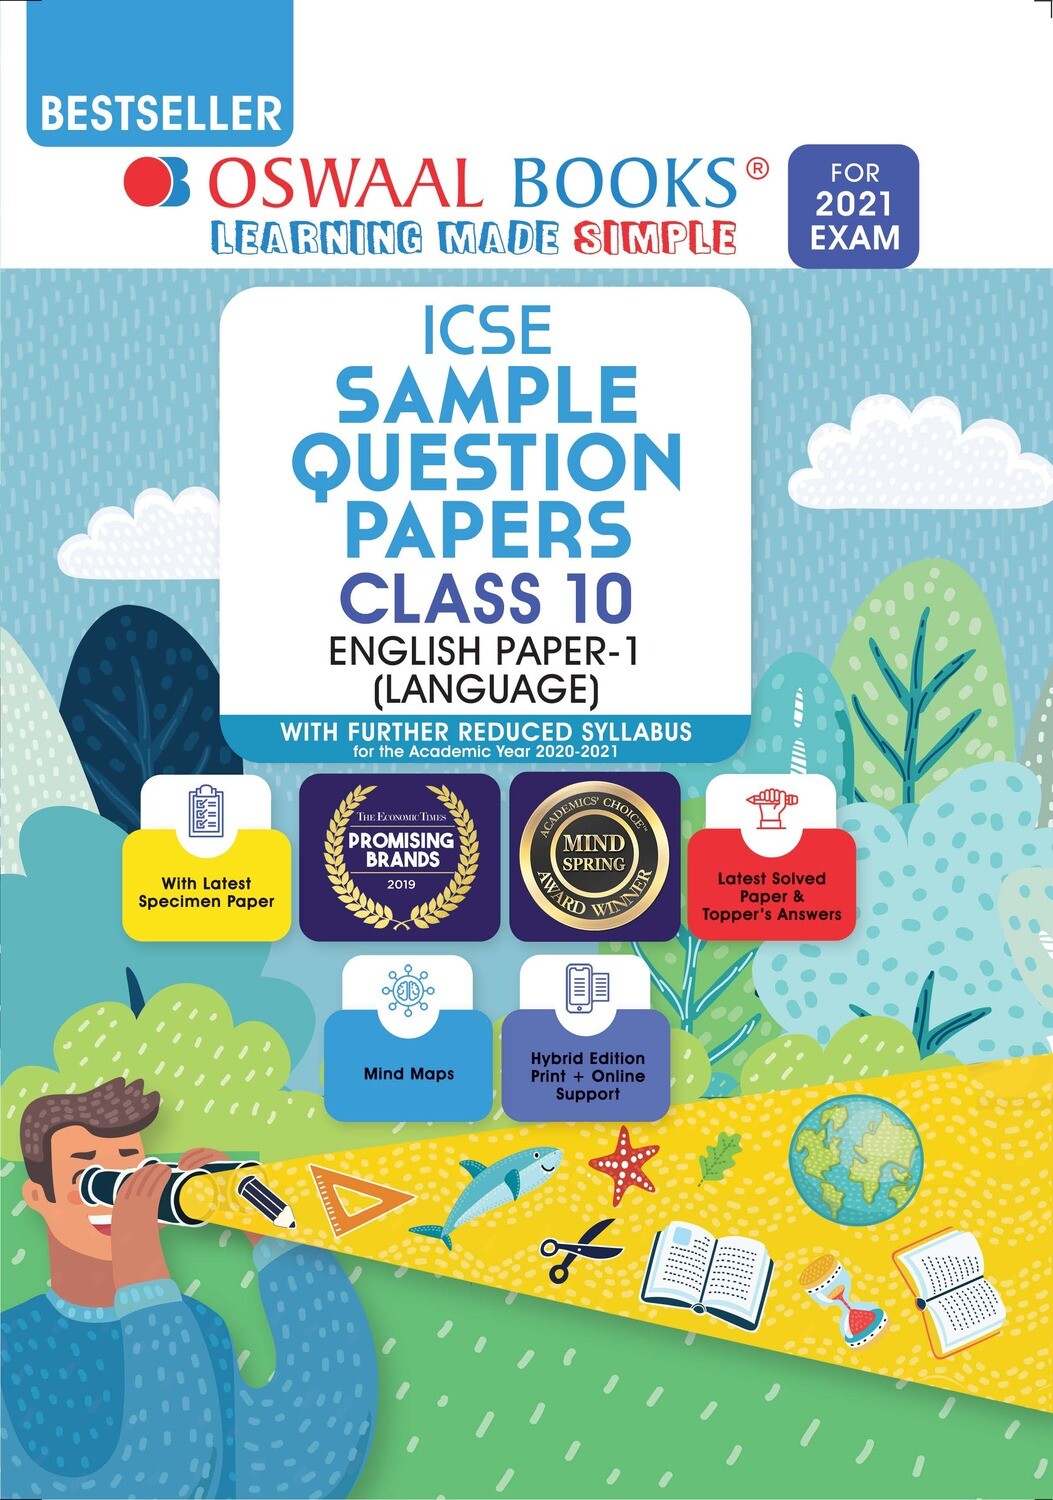 Buy e-book: Oswaal ICSE Sample Question Papers Class 10 English Paper 1 Language (For 2021 Exam)